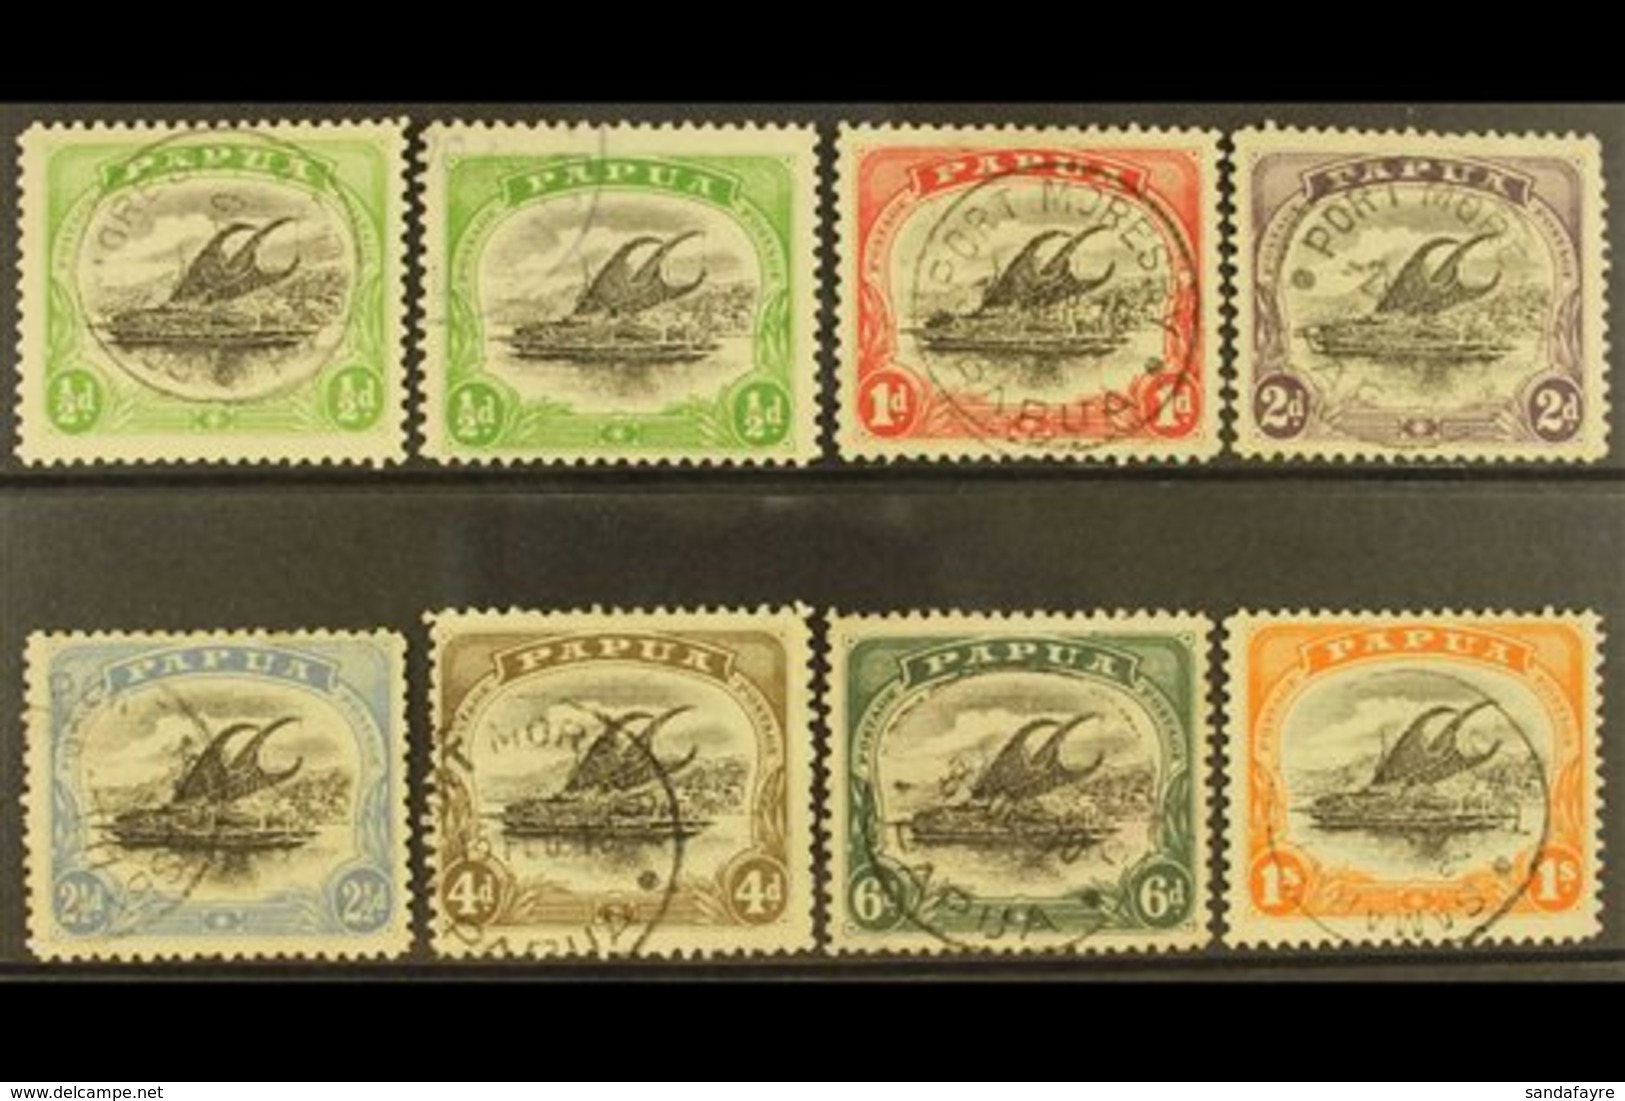 1909-10  Lakatoi Watermark Sideways, Perf 11 Set With Both ½d Shades, SG 59/65, Fine Cds Used. (8) For More Images, Plea - Papoea-Nieuw-Guinea